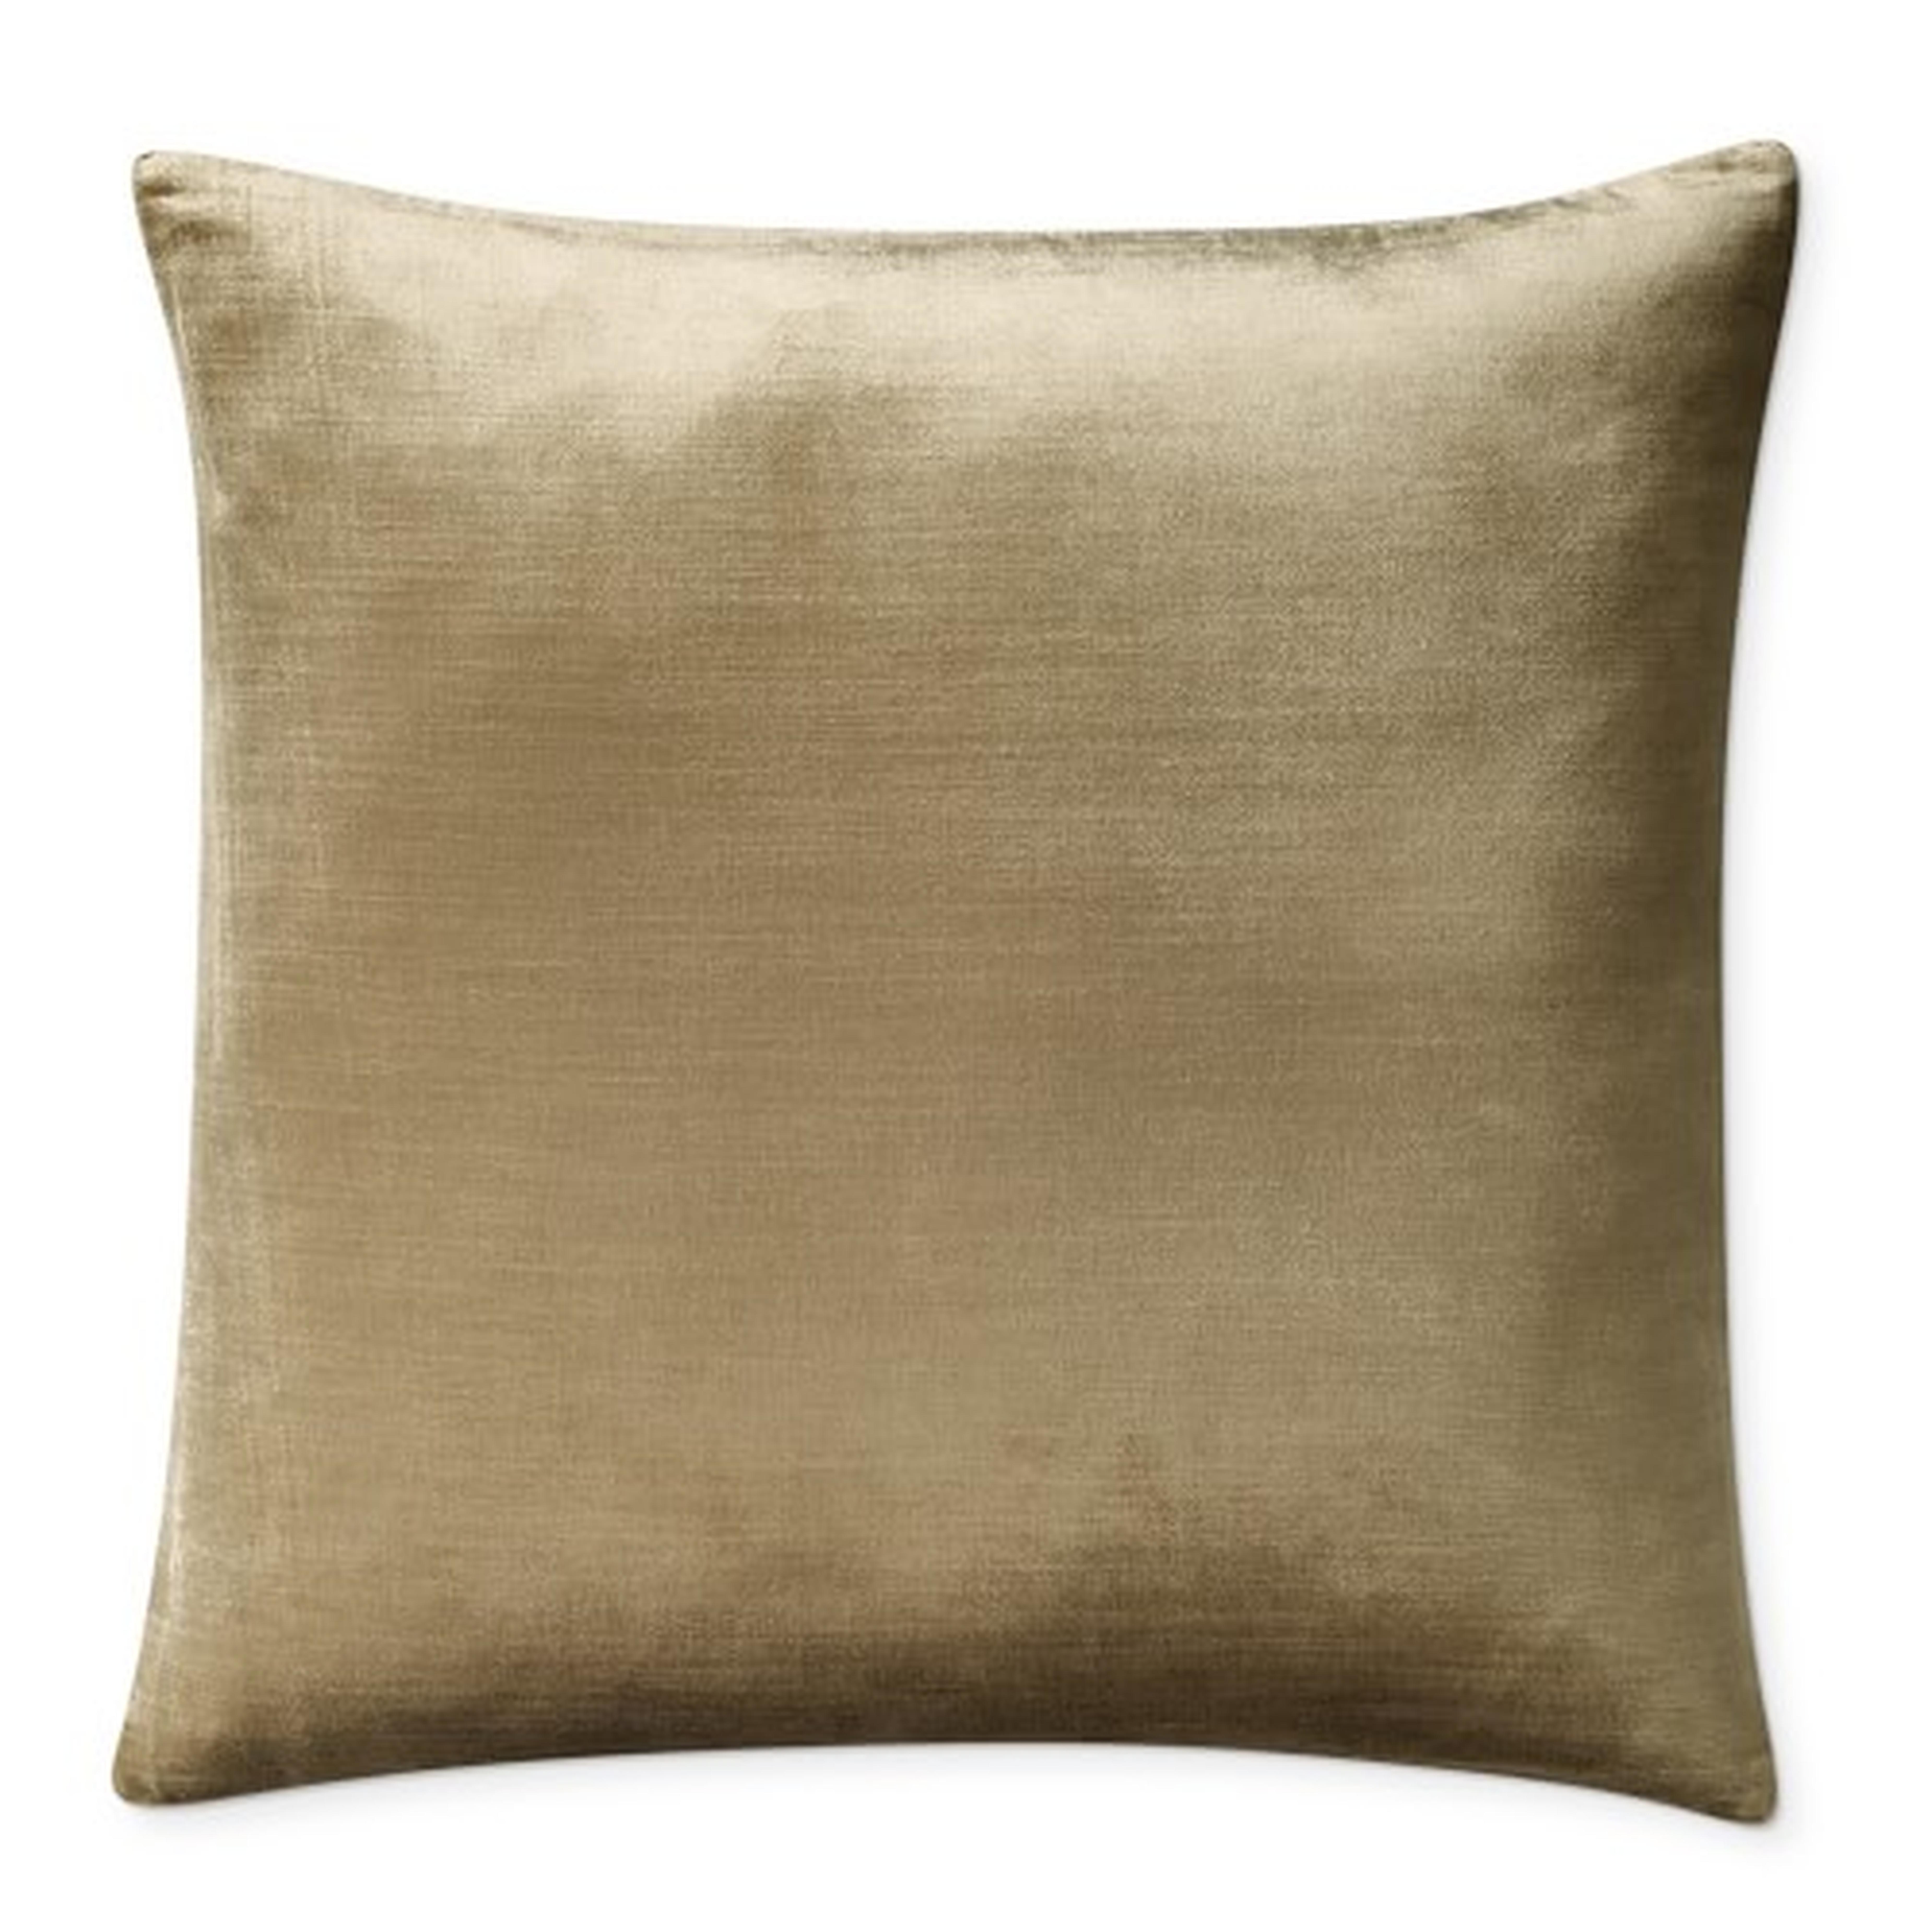 Solid Velvet Pillow Cover, 22" x 22", Taupe - Williams Sonoma